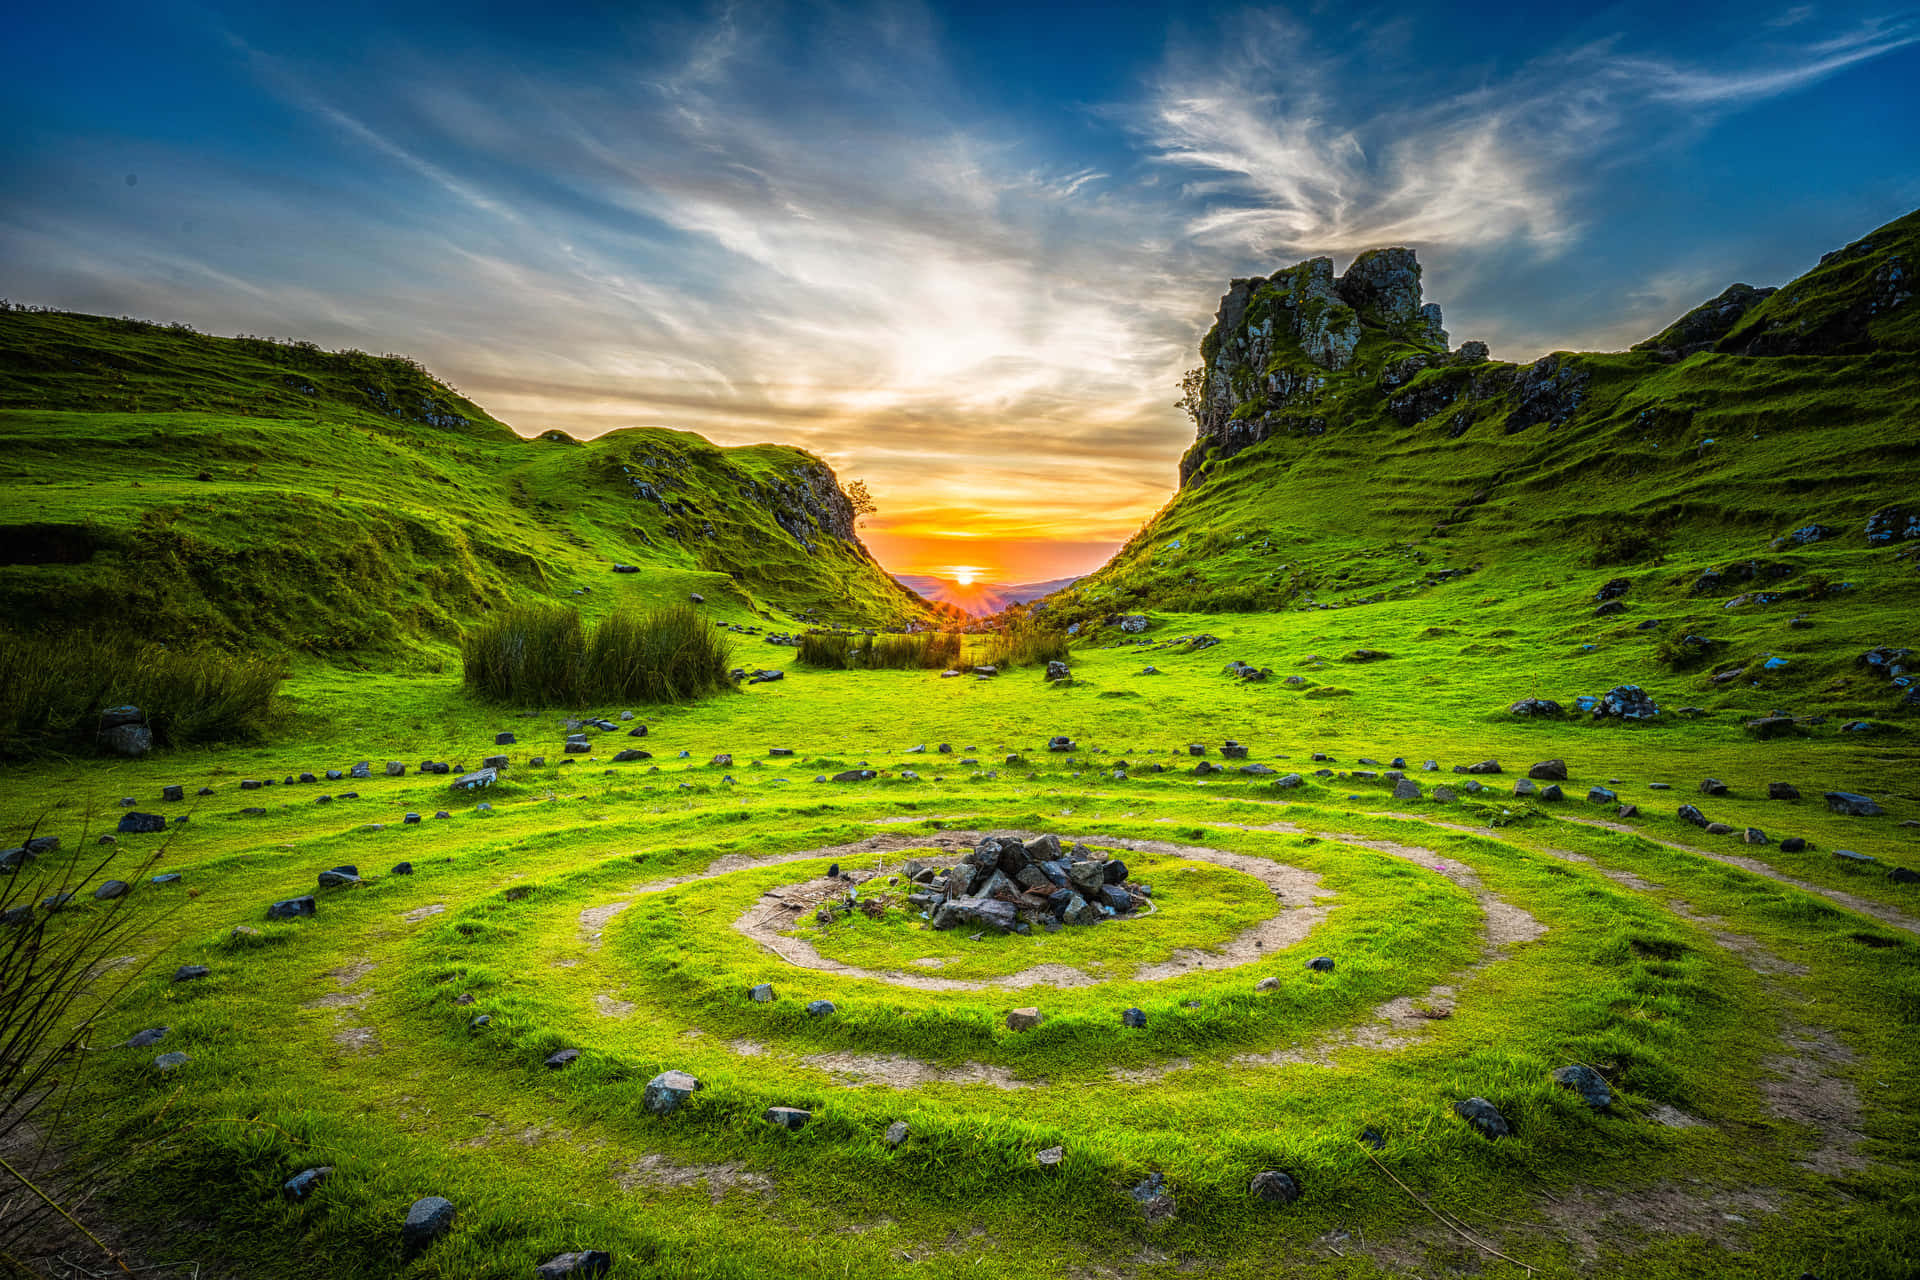 A Circular Grassy Field With Rocks In The Middle Wallpaper